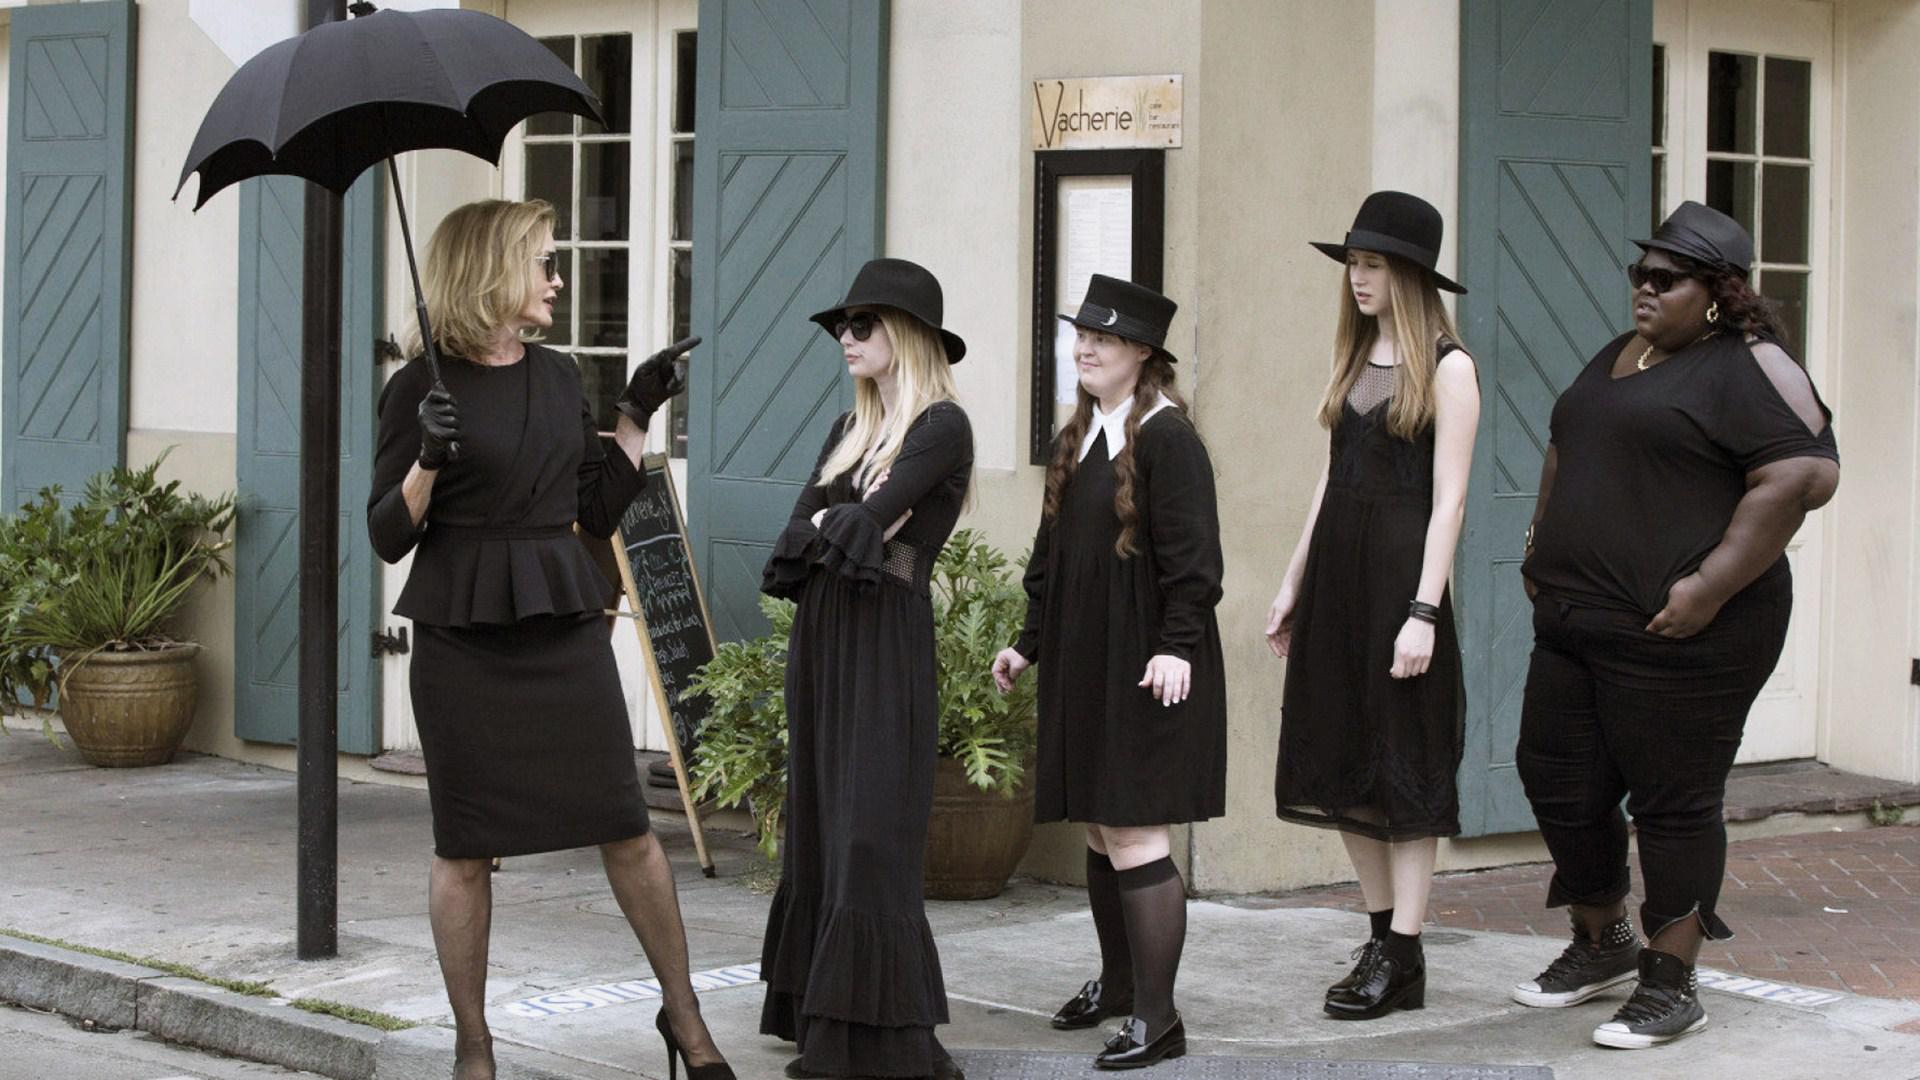 American Horror Story: Coven - The Complete Third Season